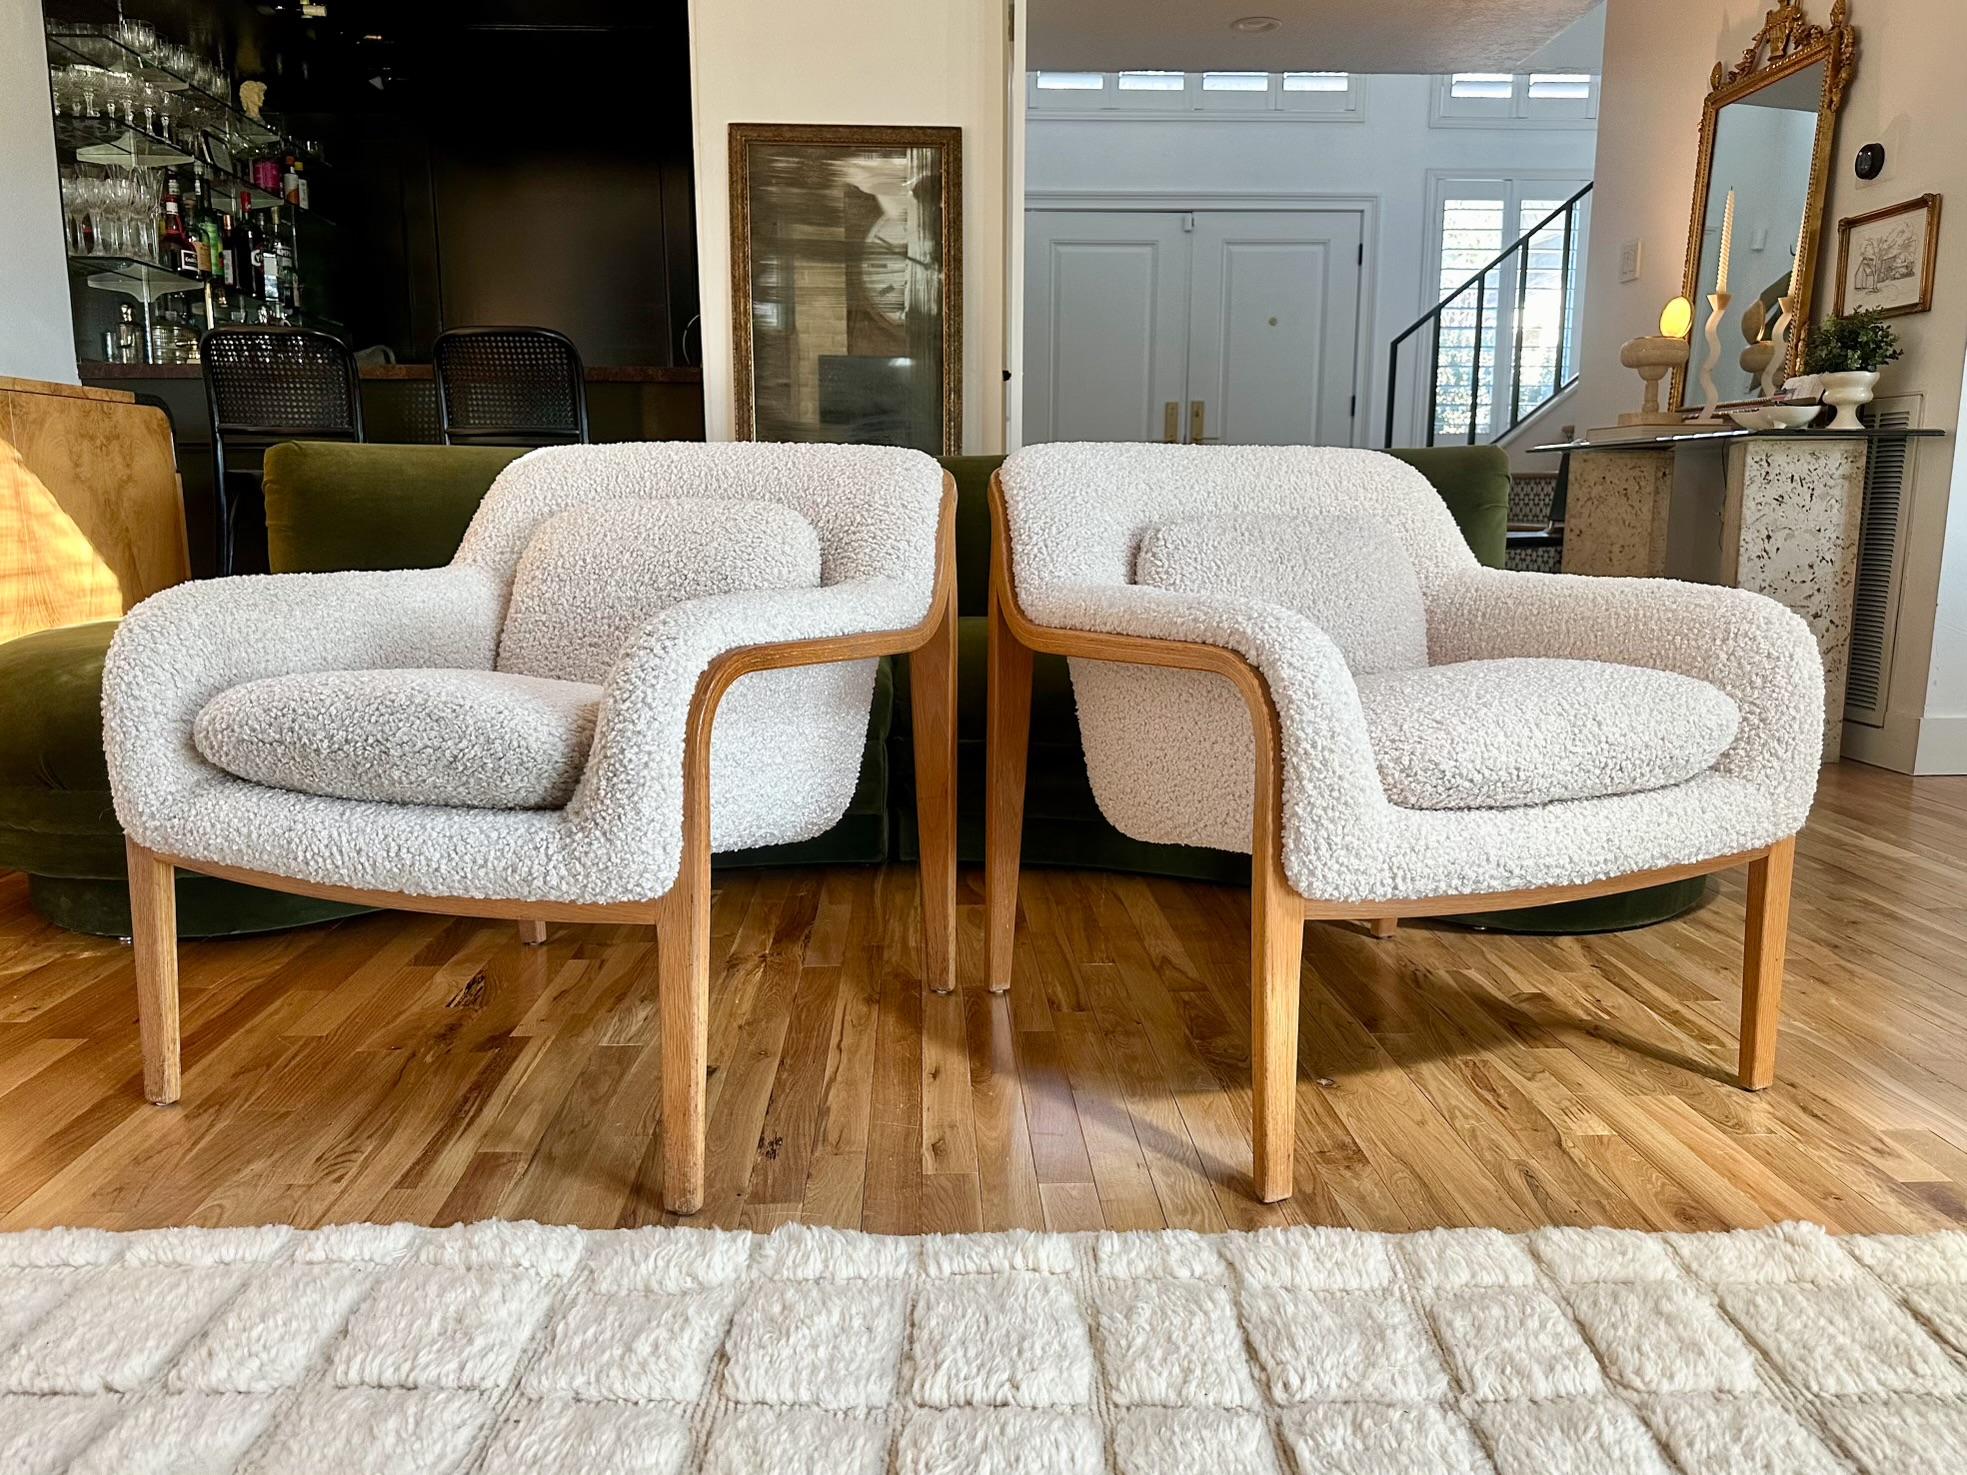 American 1981 Knoll Lounge Chairs by Bill Stephens - a Pair